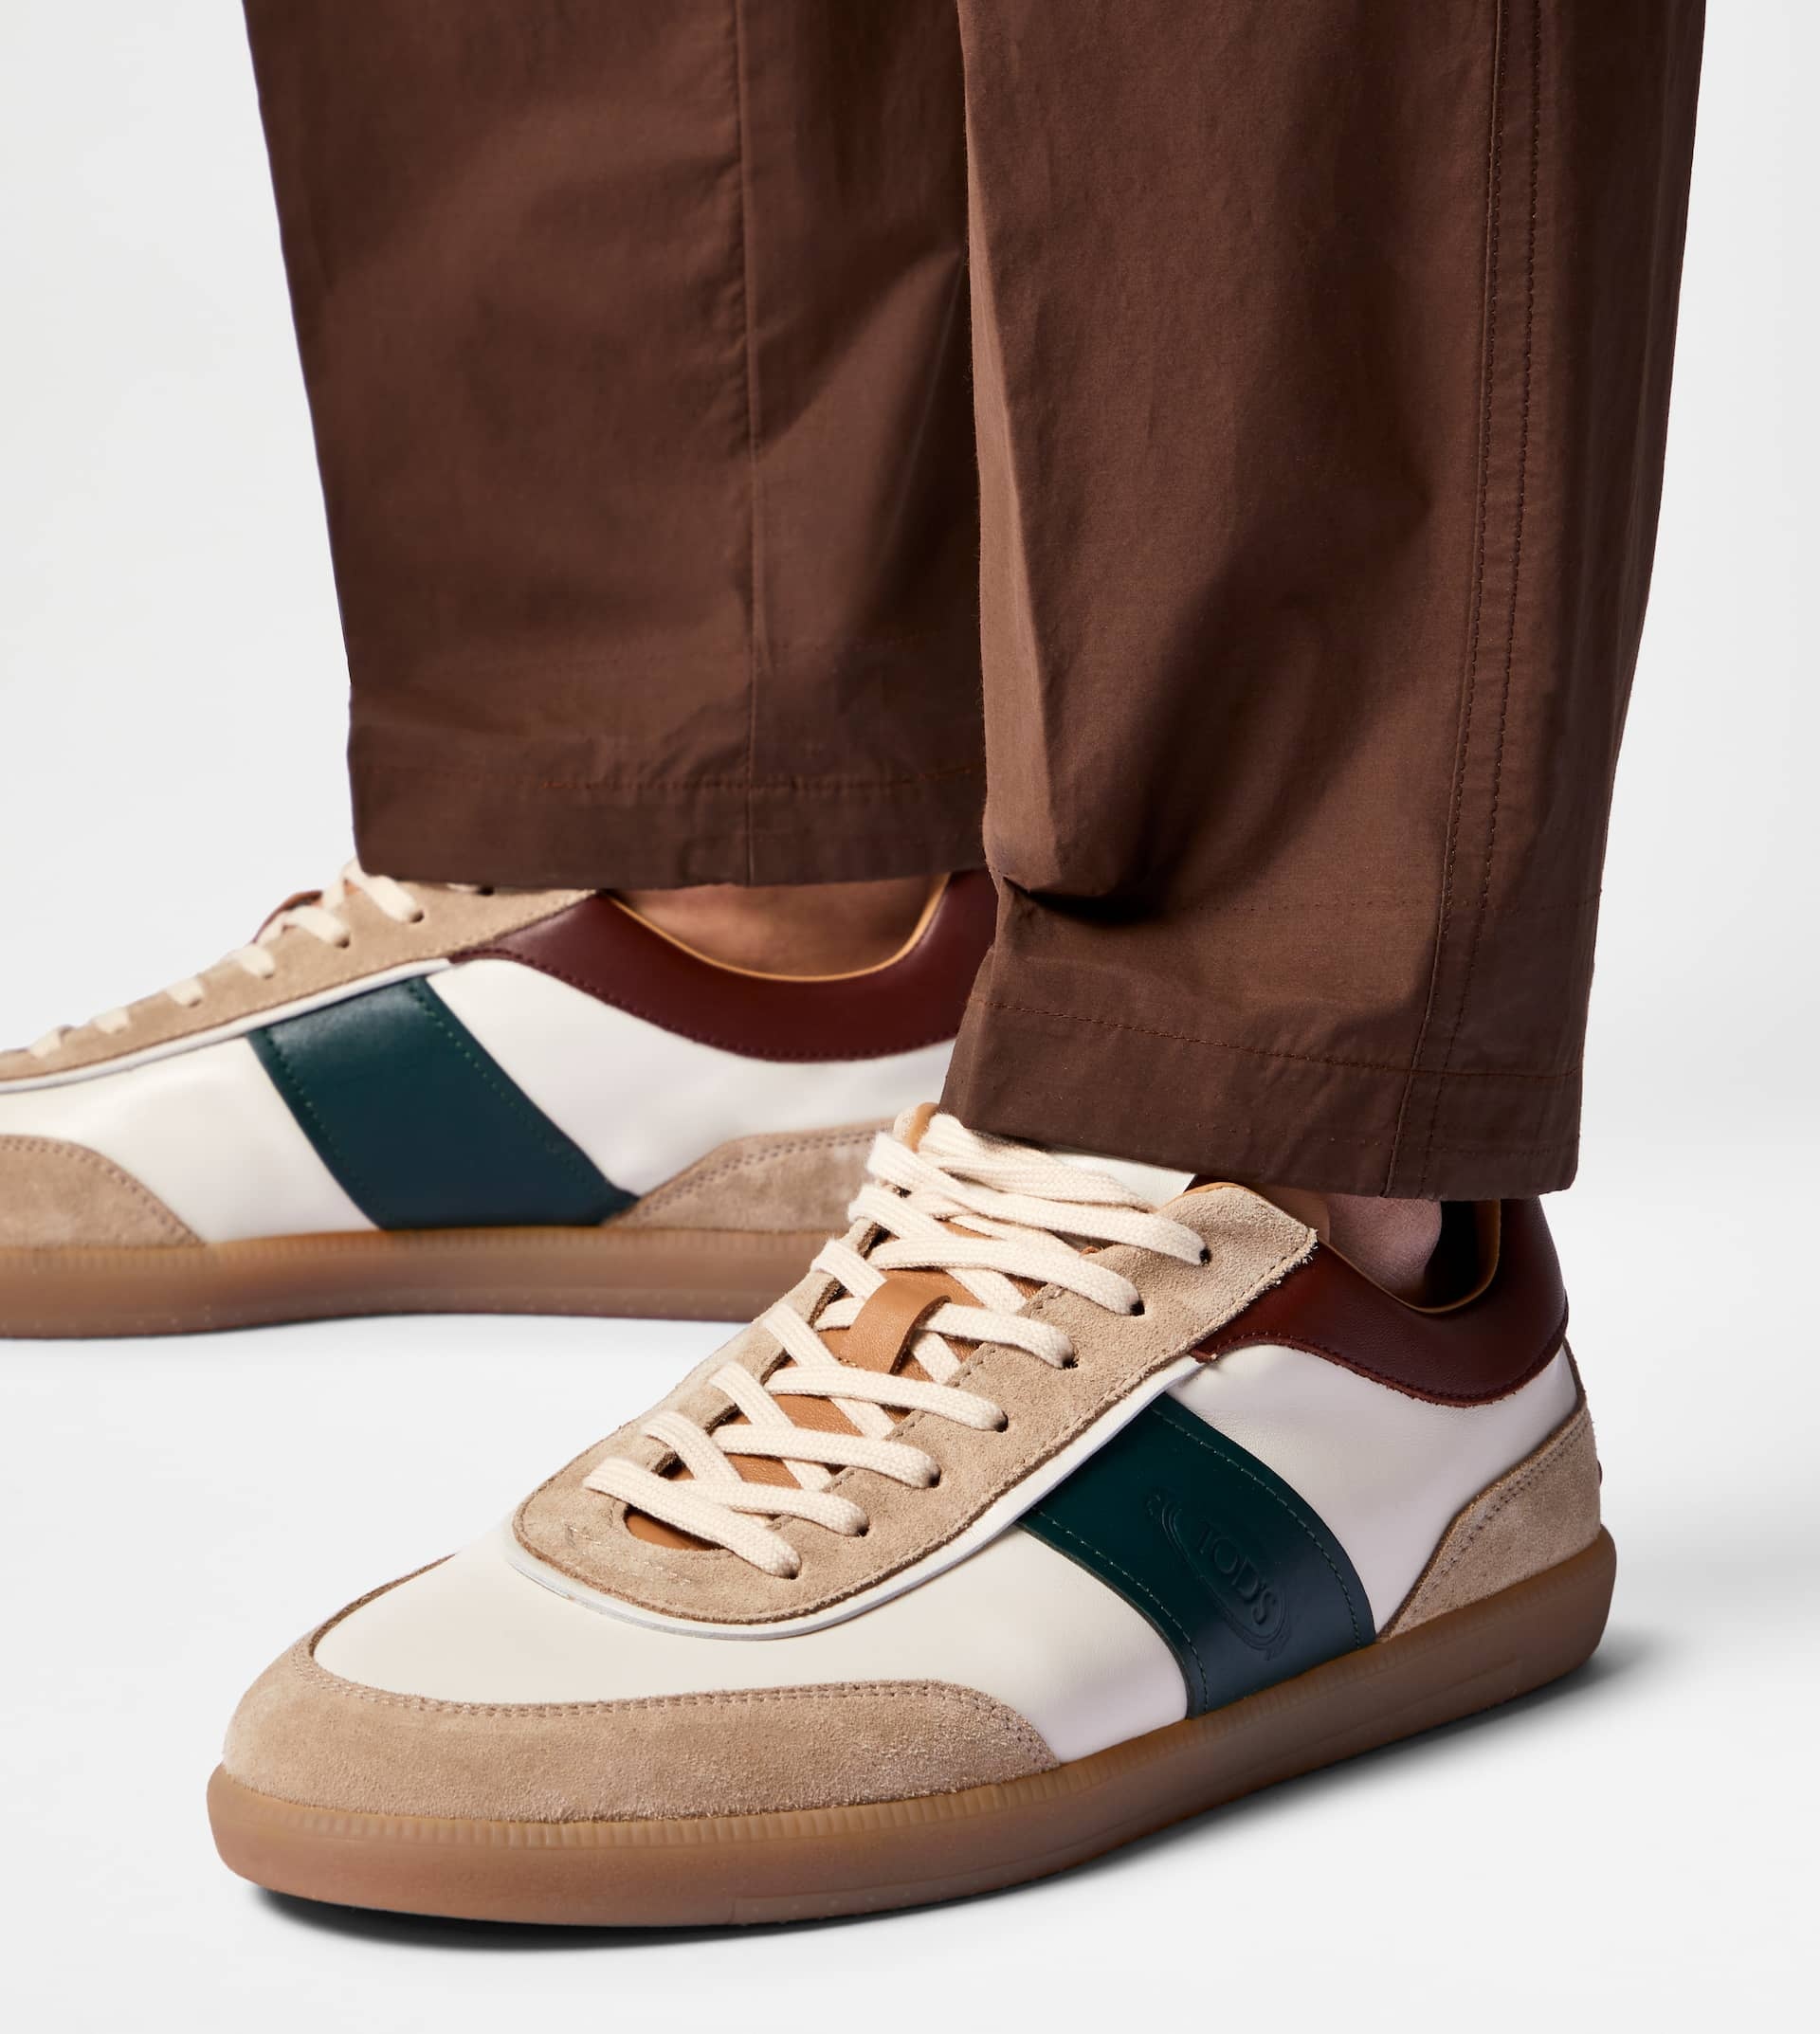 TOD'S TABS SNEAKERS IN SUEDE - OFF WHITE, BROWN, GREEN - 2